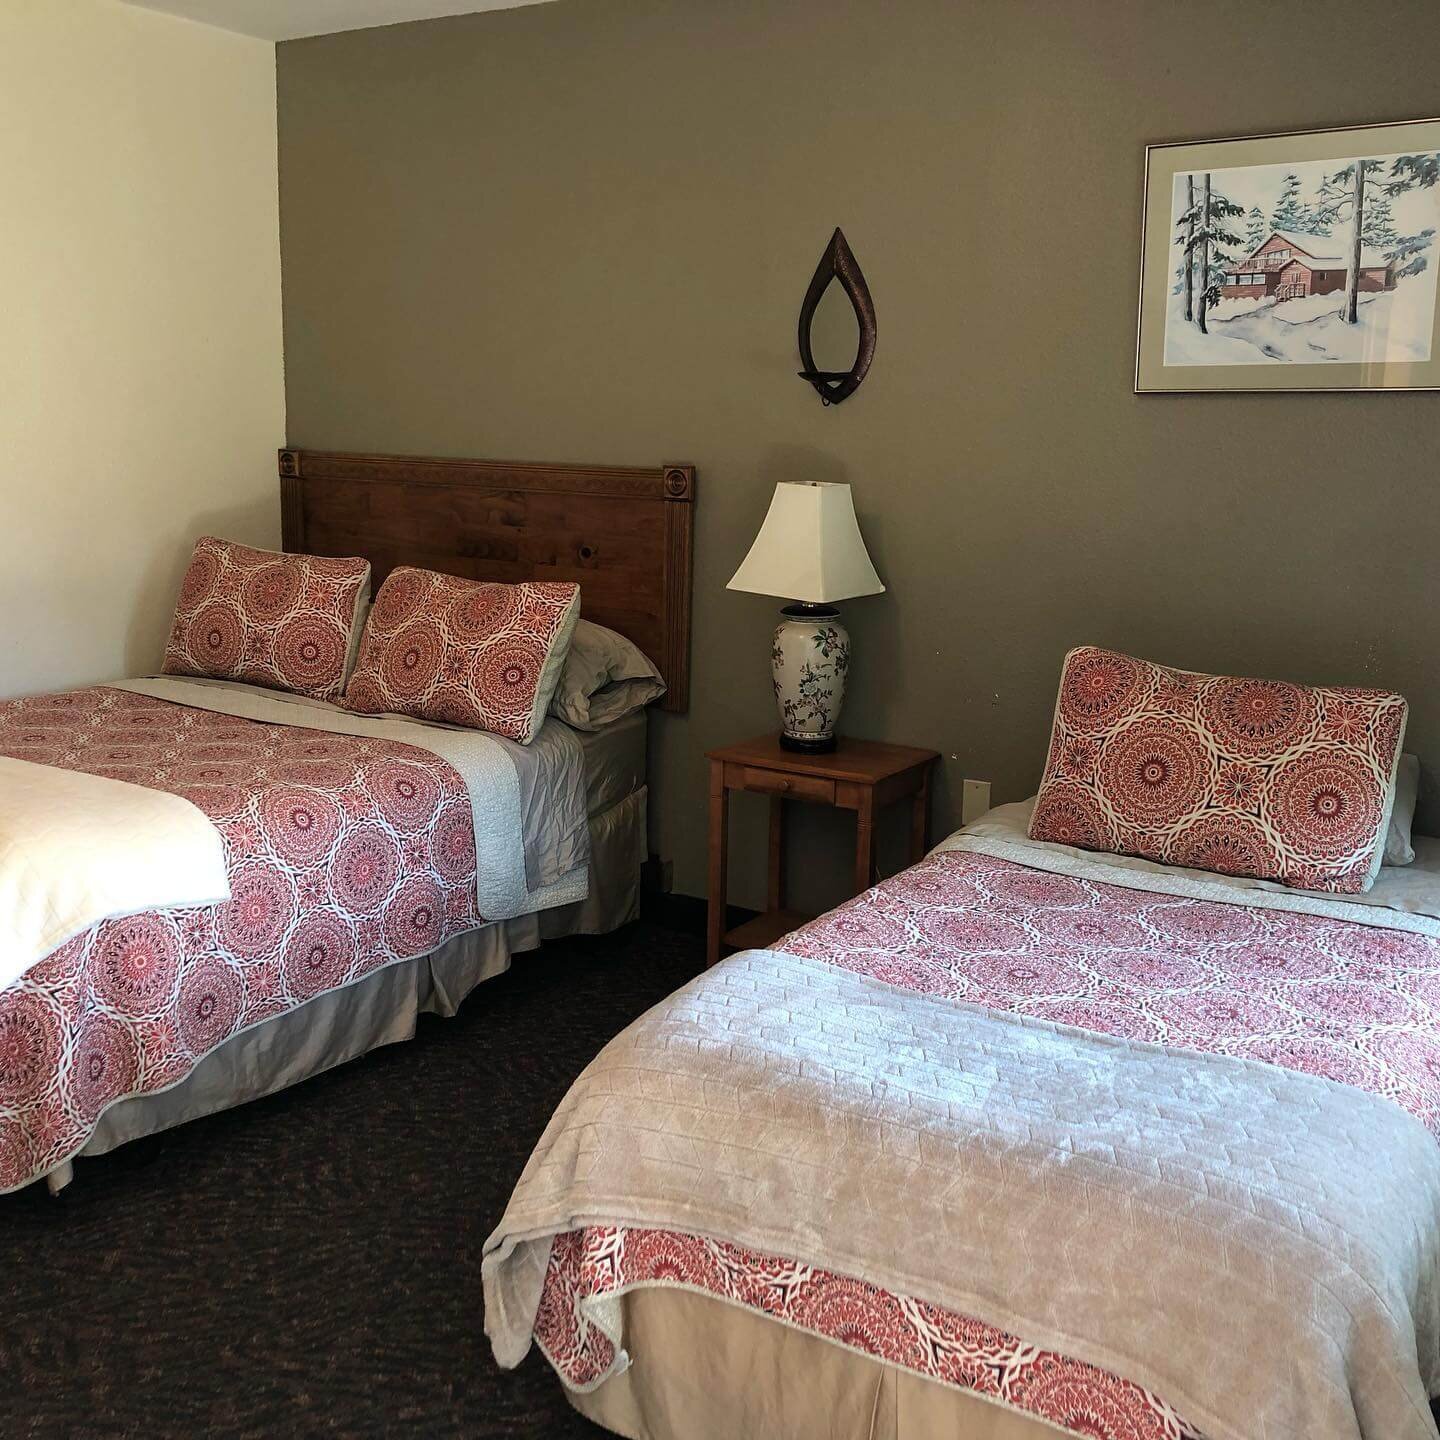  Two beds in a room for rent by Bird Creek Motel and RV Park  